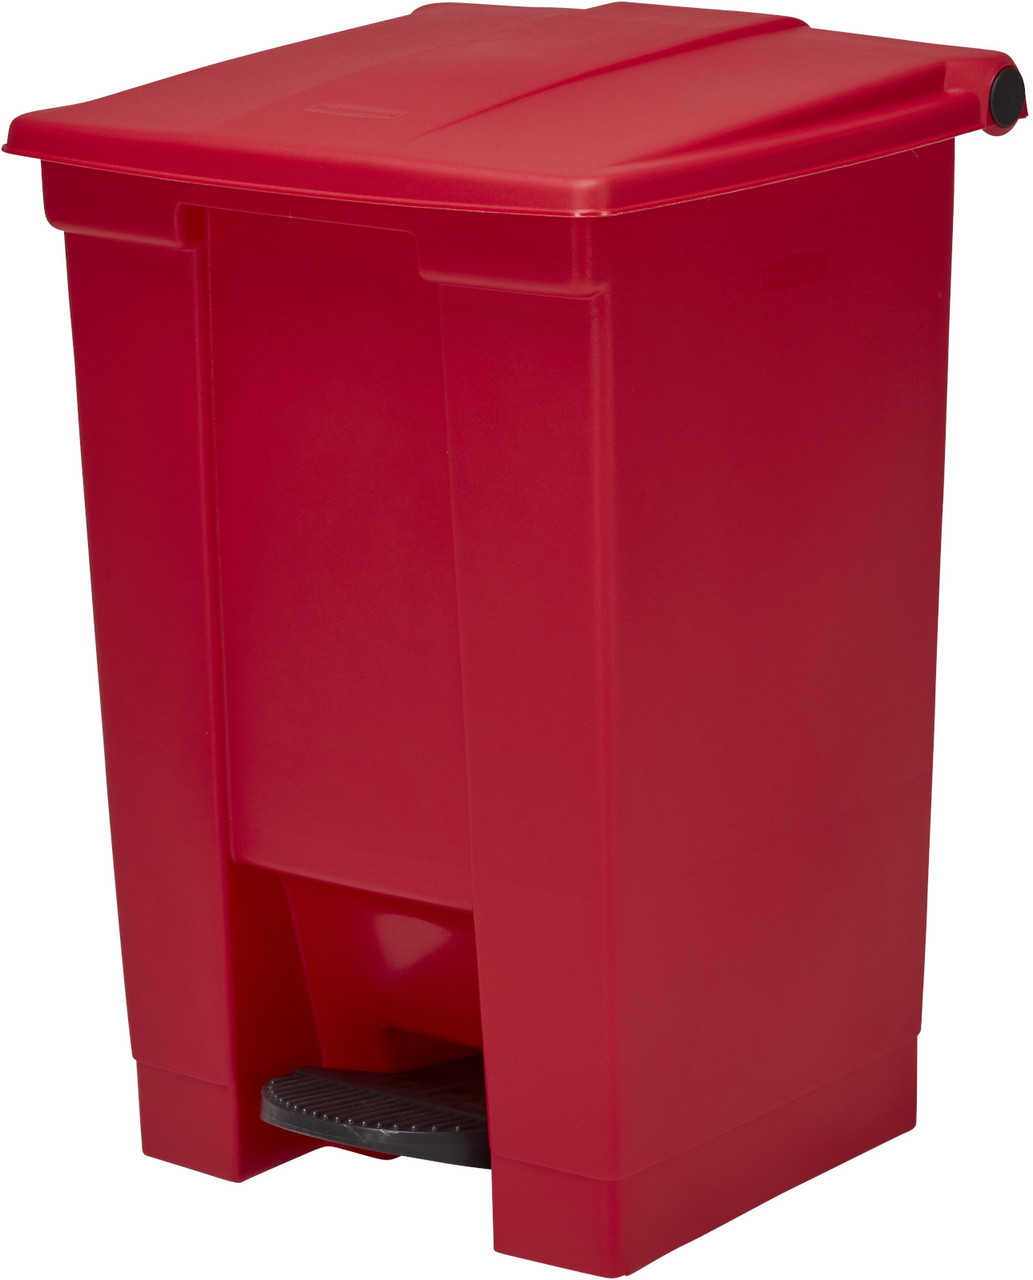 FG614500RED - Rubbermaid Legacy Step-On Pedal Bin - 68 Ltr - Red